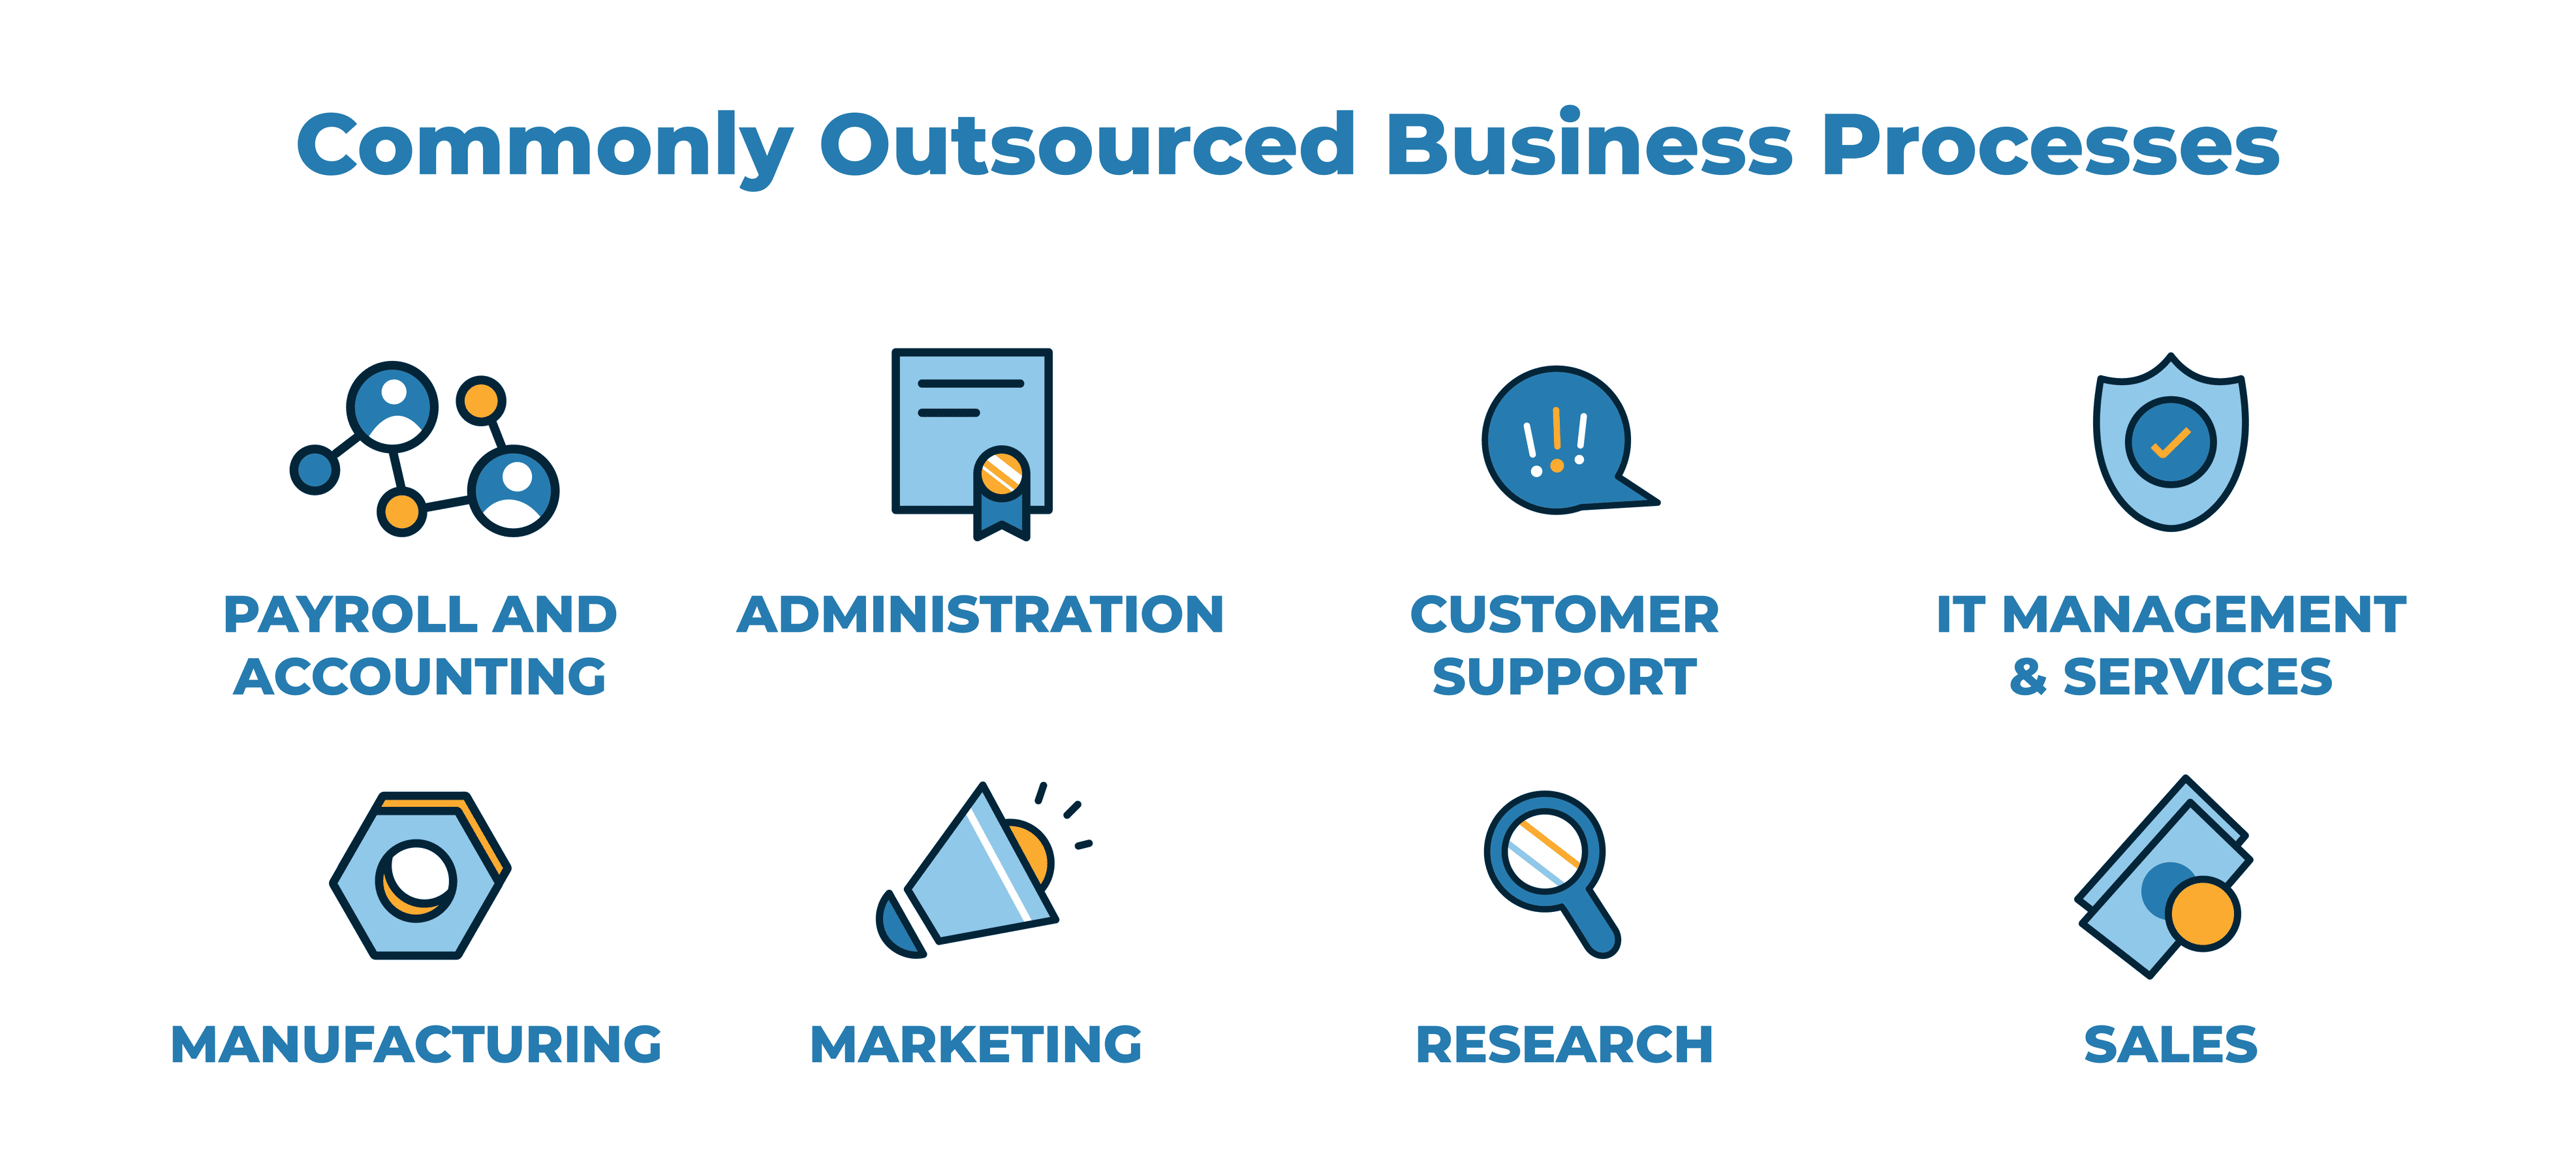 Commonly Outsourced Business Processes